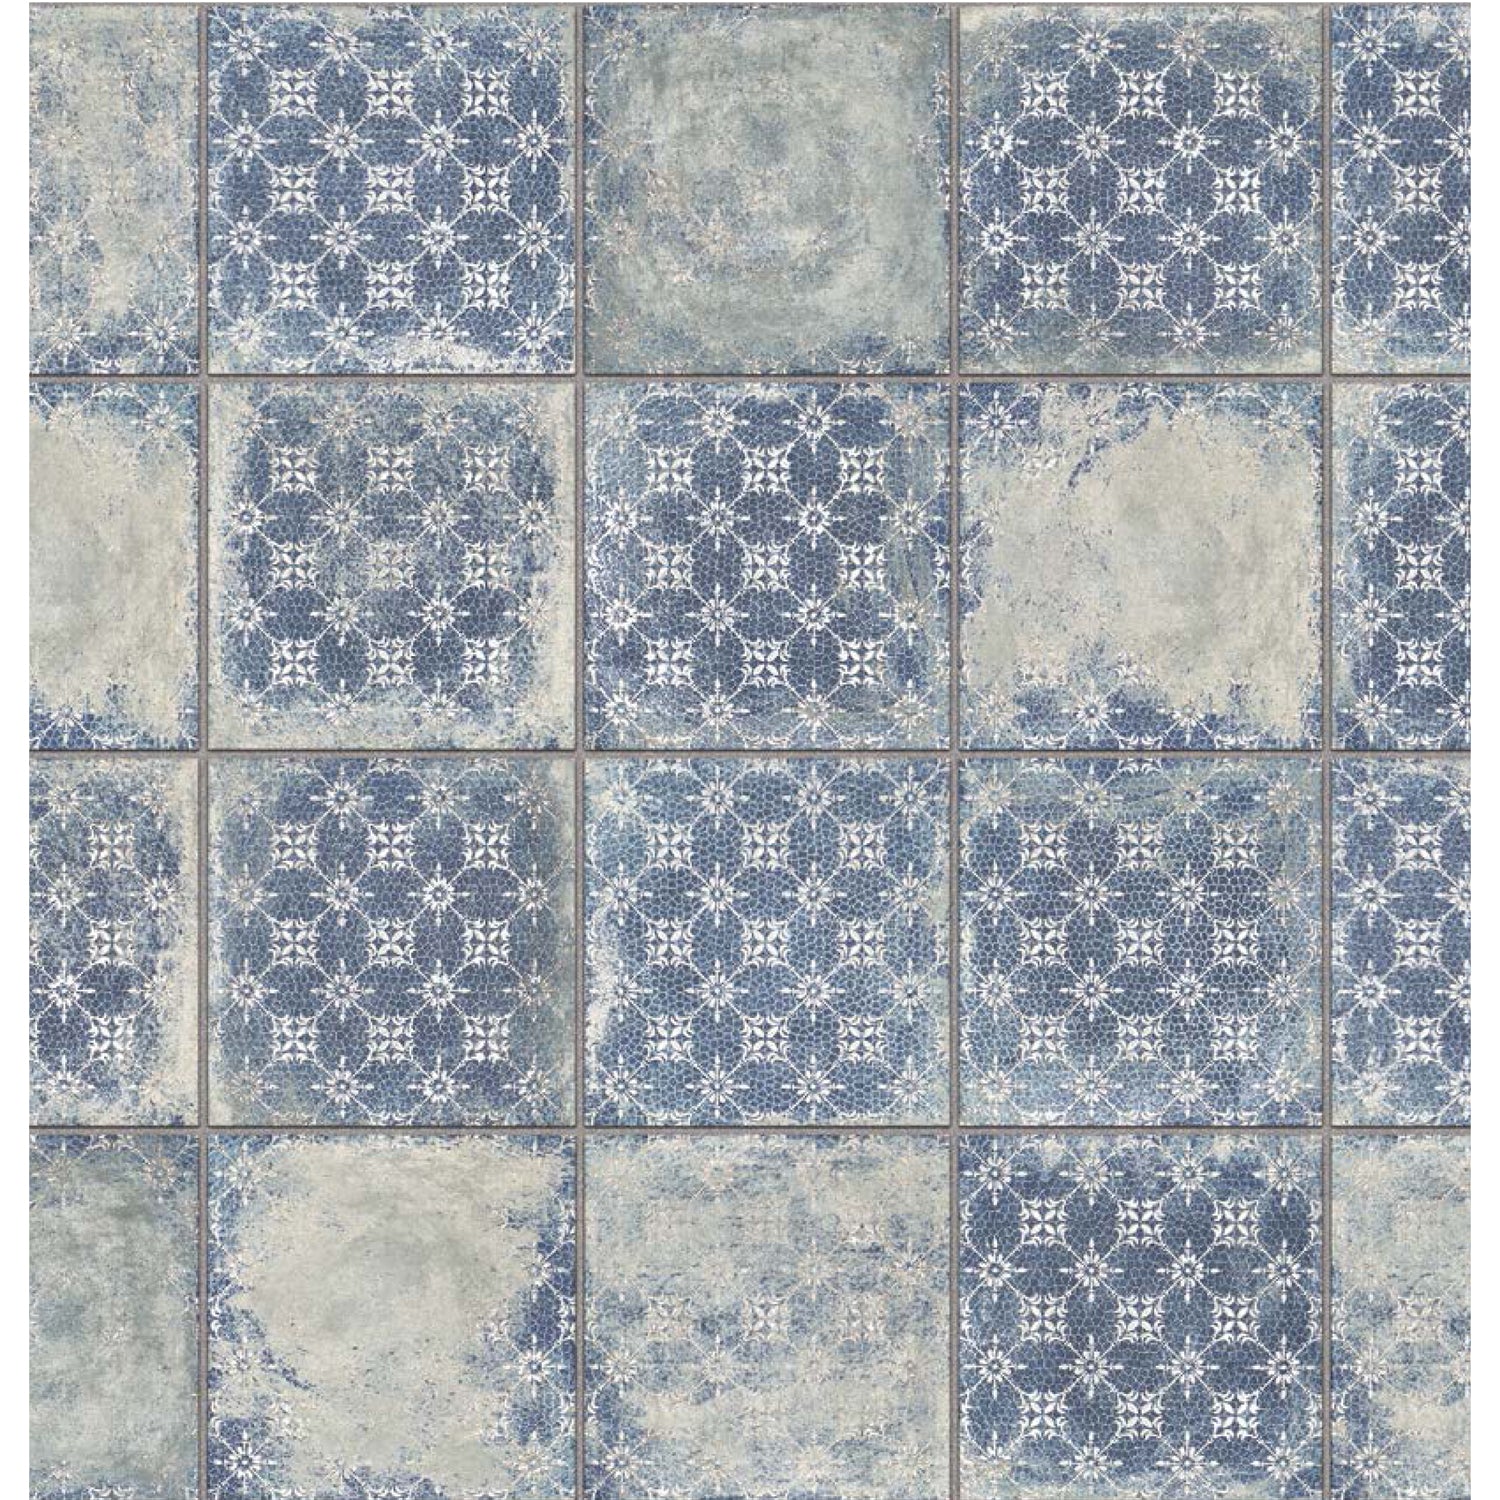 Topcu - Clay 8 in. x 8 in. Porcelain Tile  - Fossil Eve